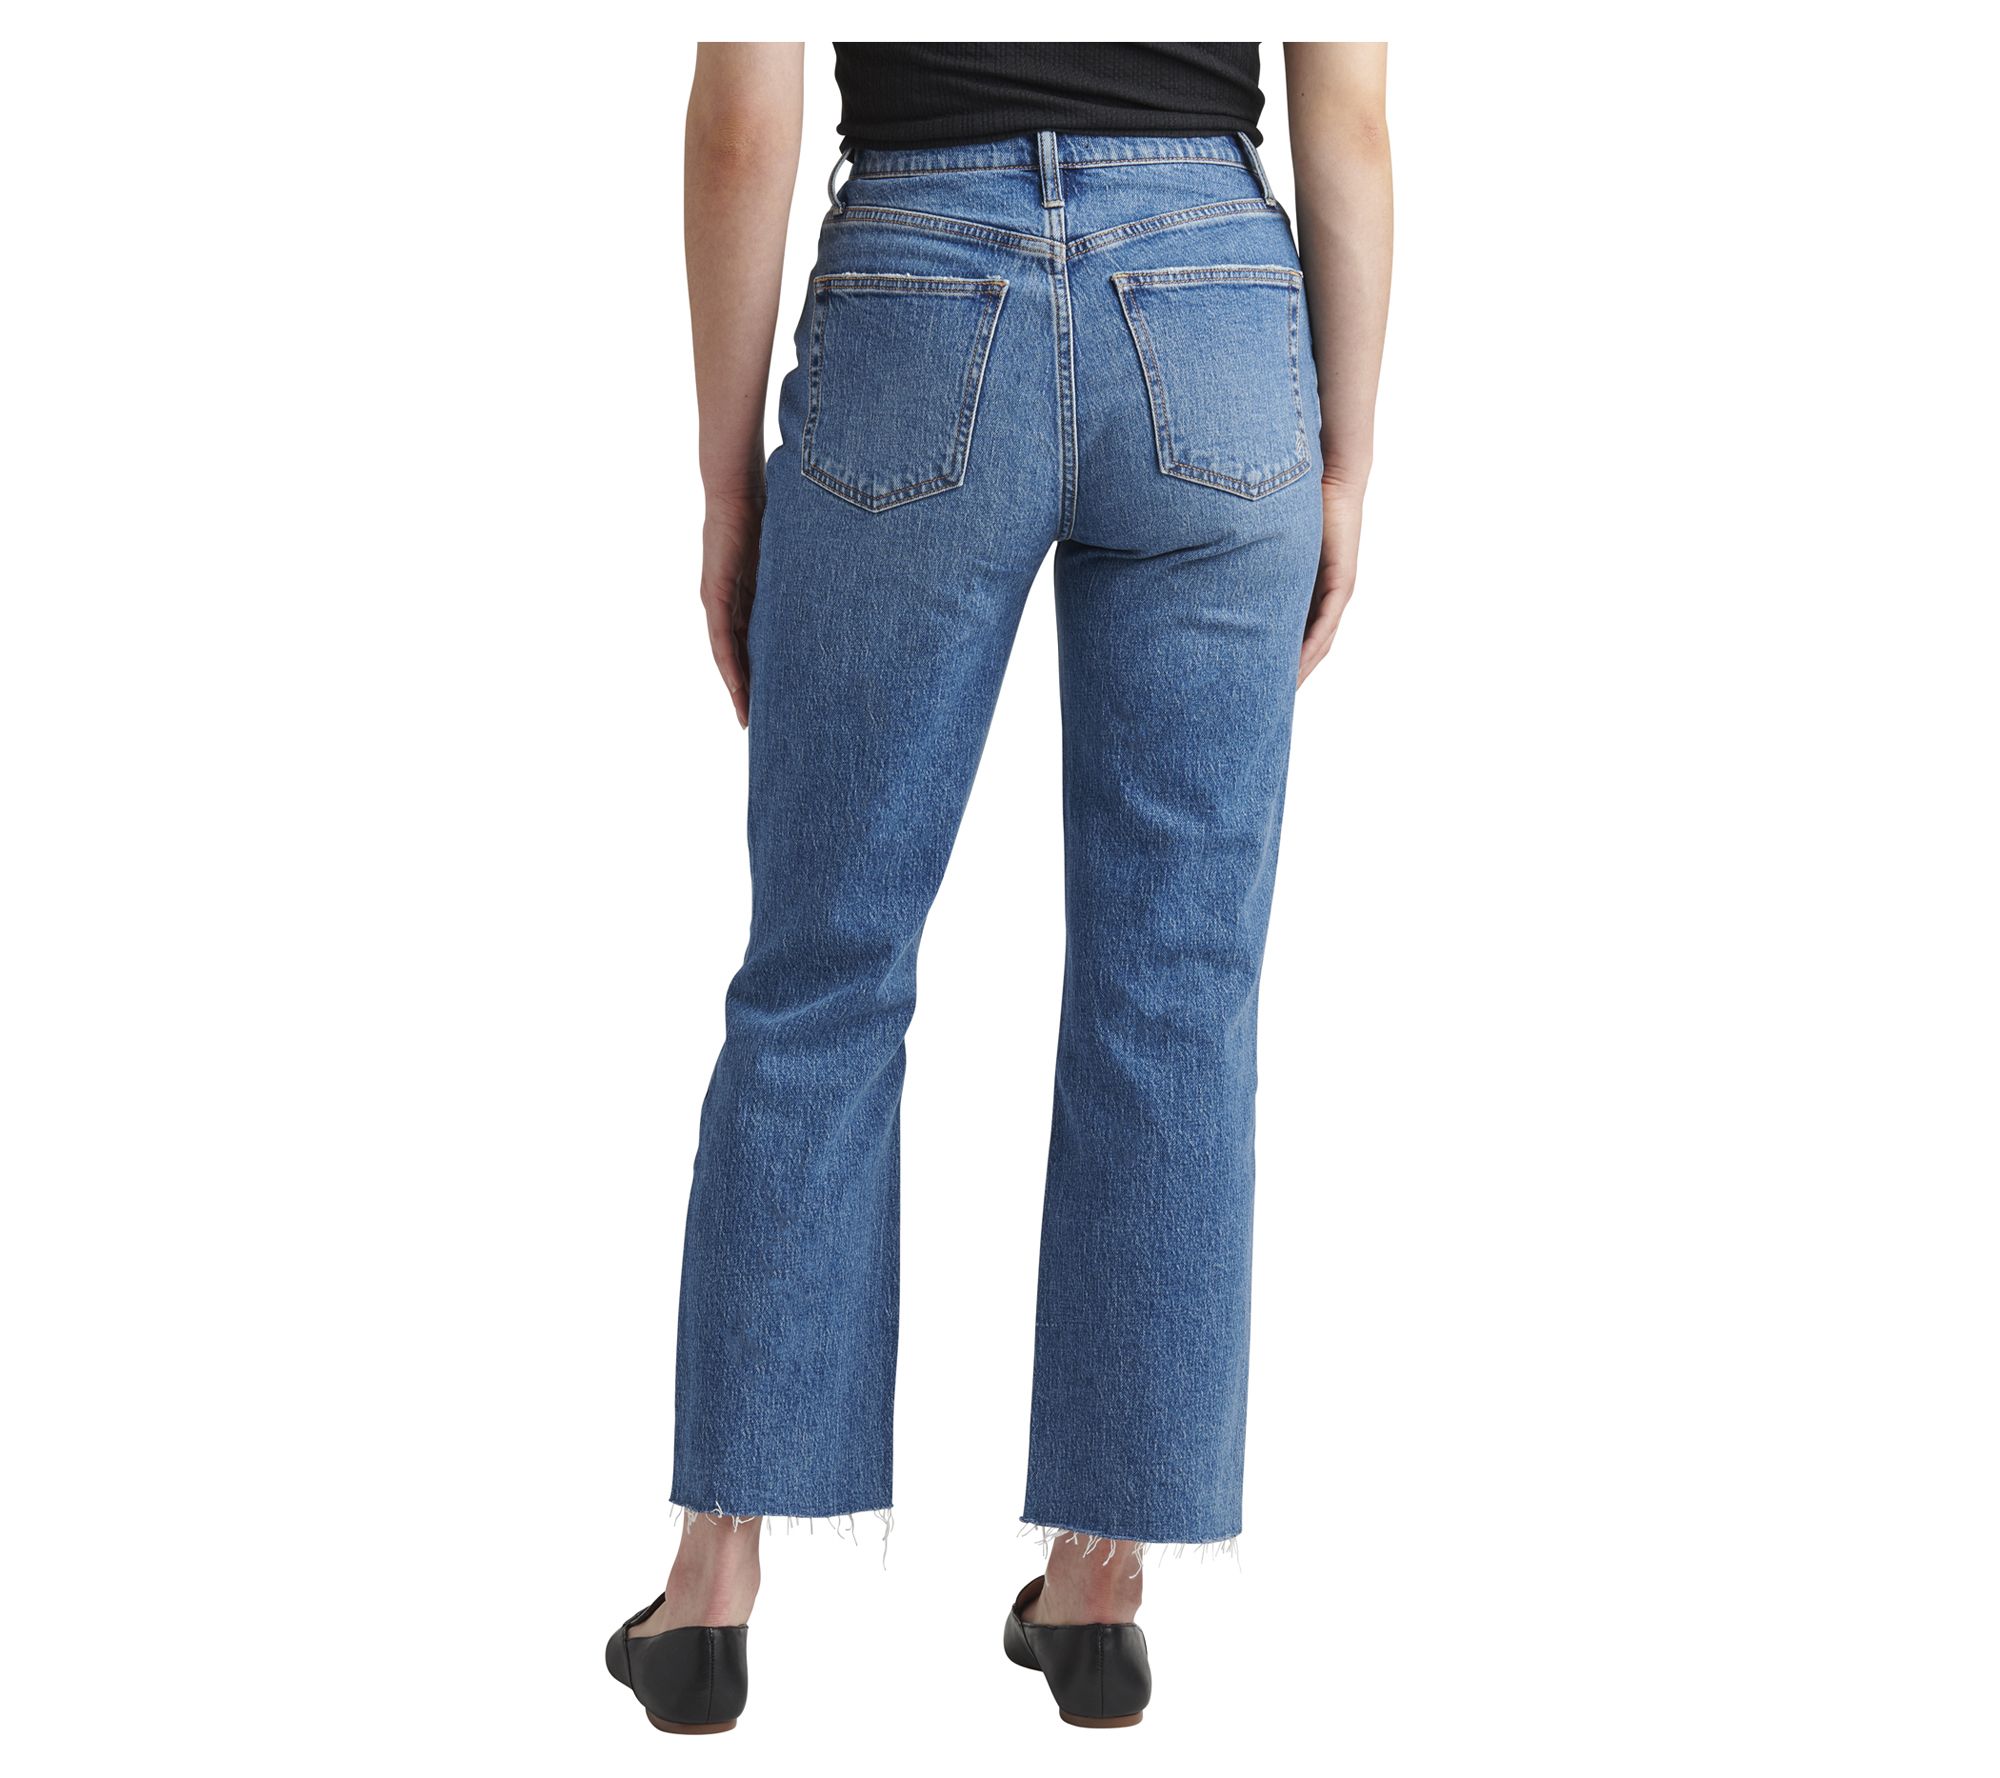 Silver Jeans Co. Highly Desirable Straight LegJeans-RCS354 - QVC.com